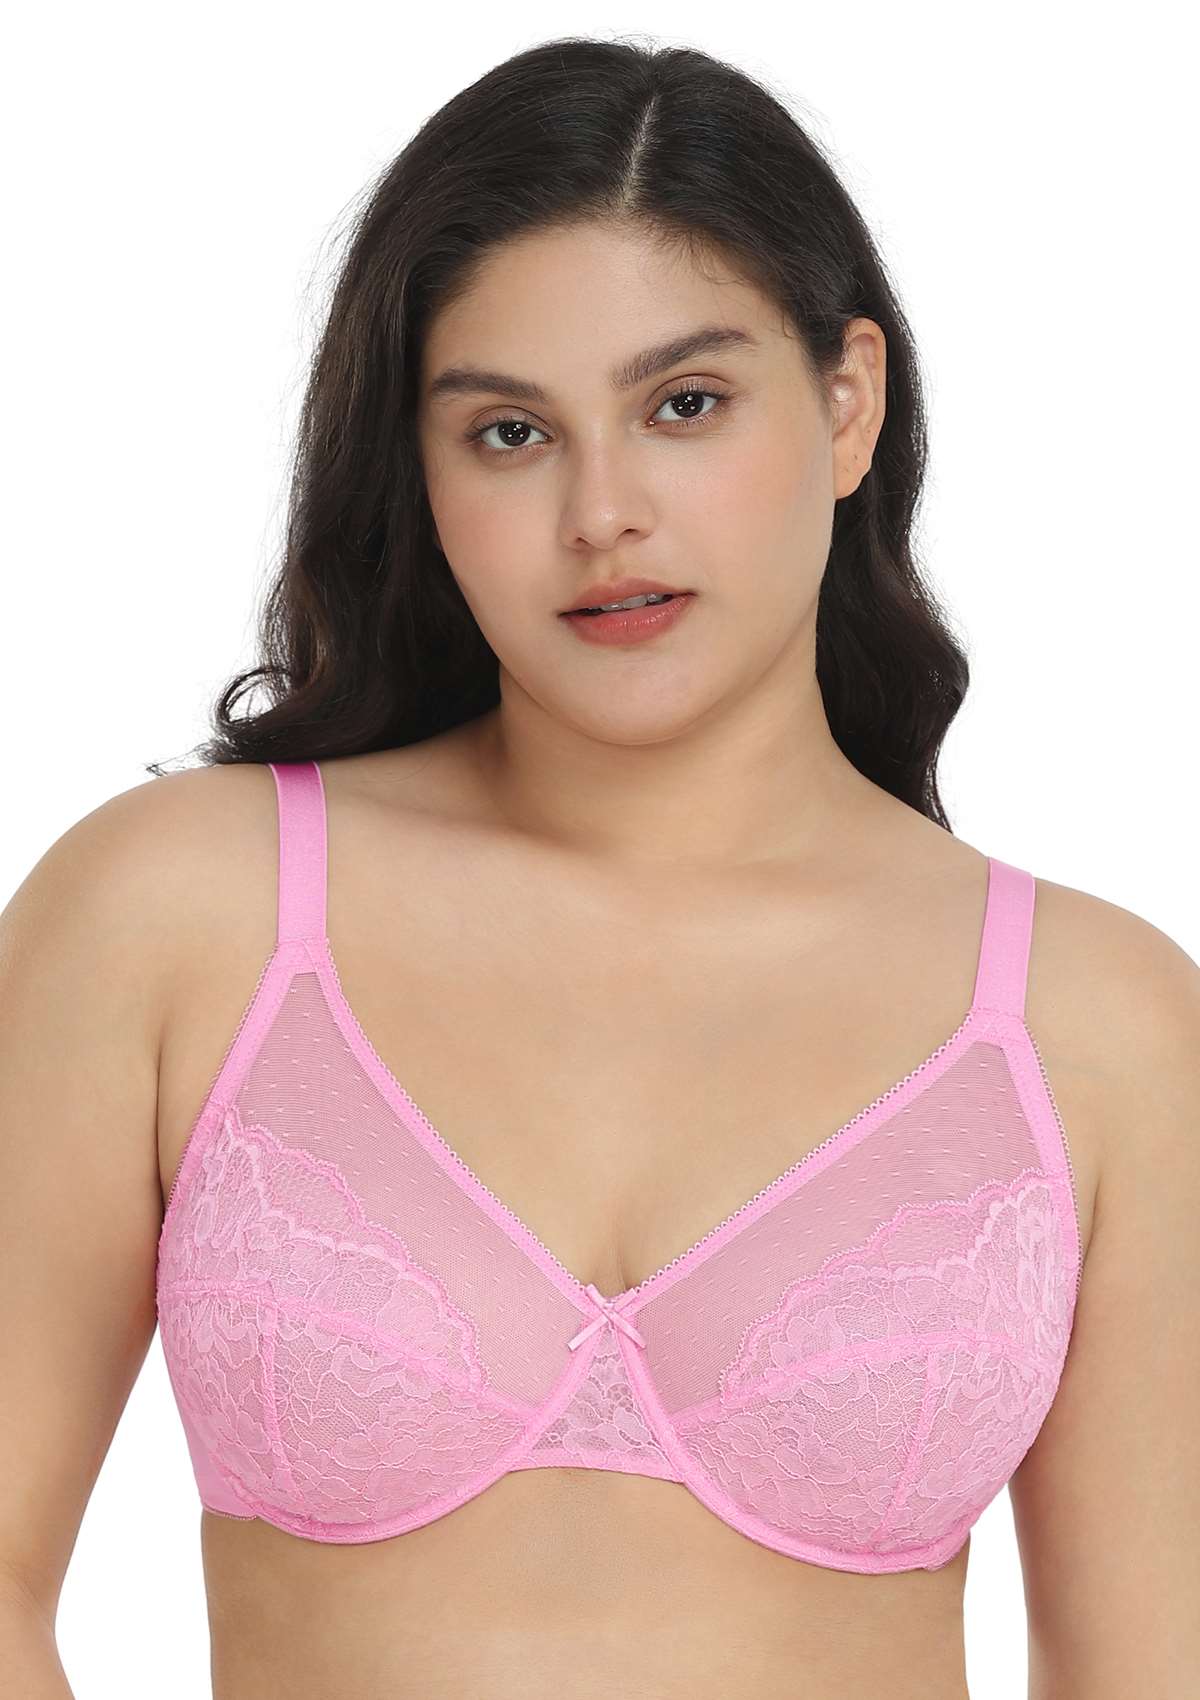 HSIA Enchante Lacy Bra: Comfy Sheer Lace Bra With Lift - Pink / 42 / H